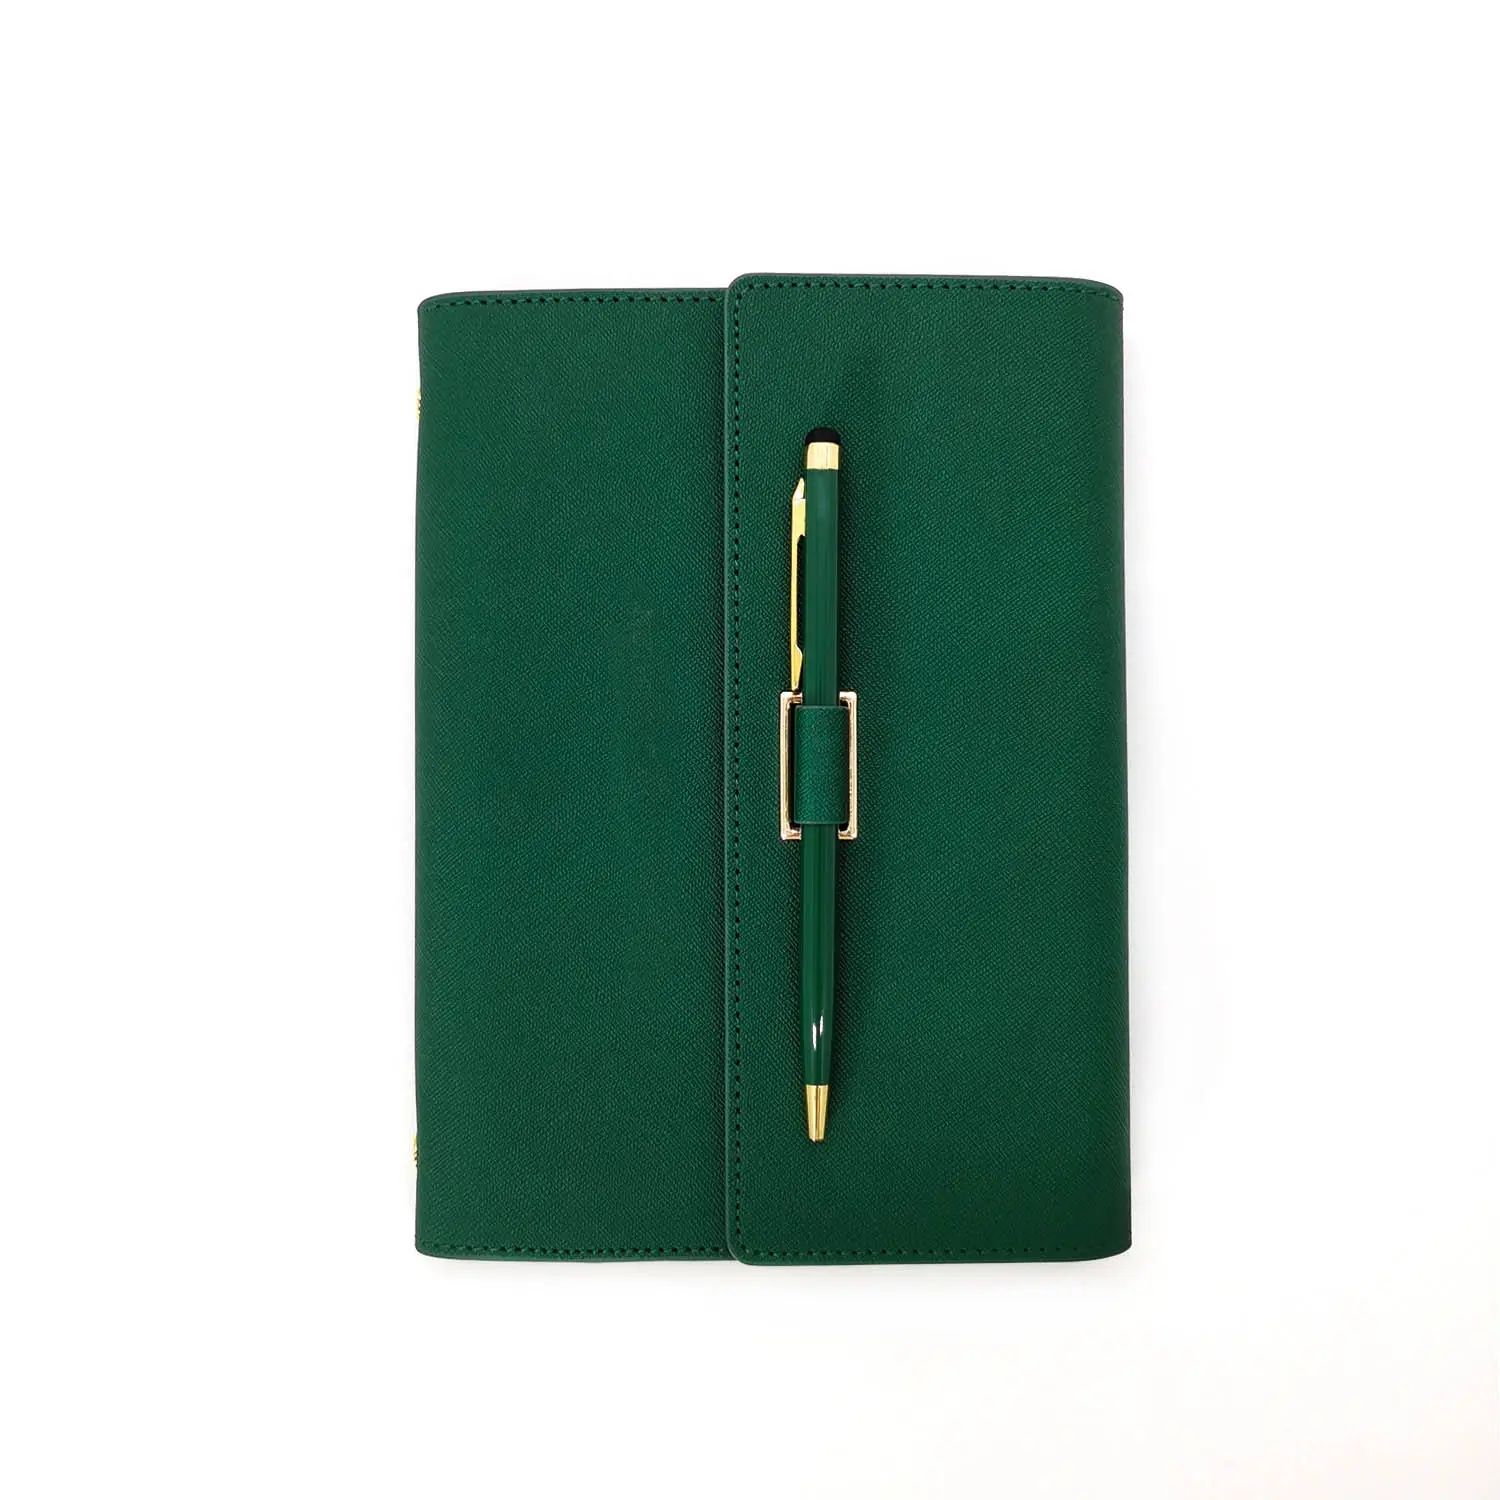 Hard Cover Notebook A5 Custom Perfect Bound Binding Planner Notebook Set Printing and Packaging